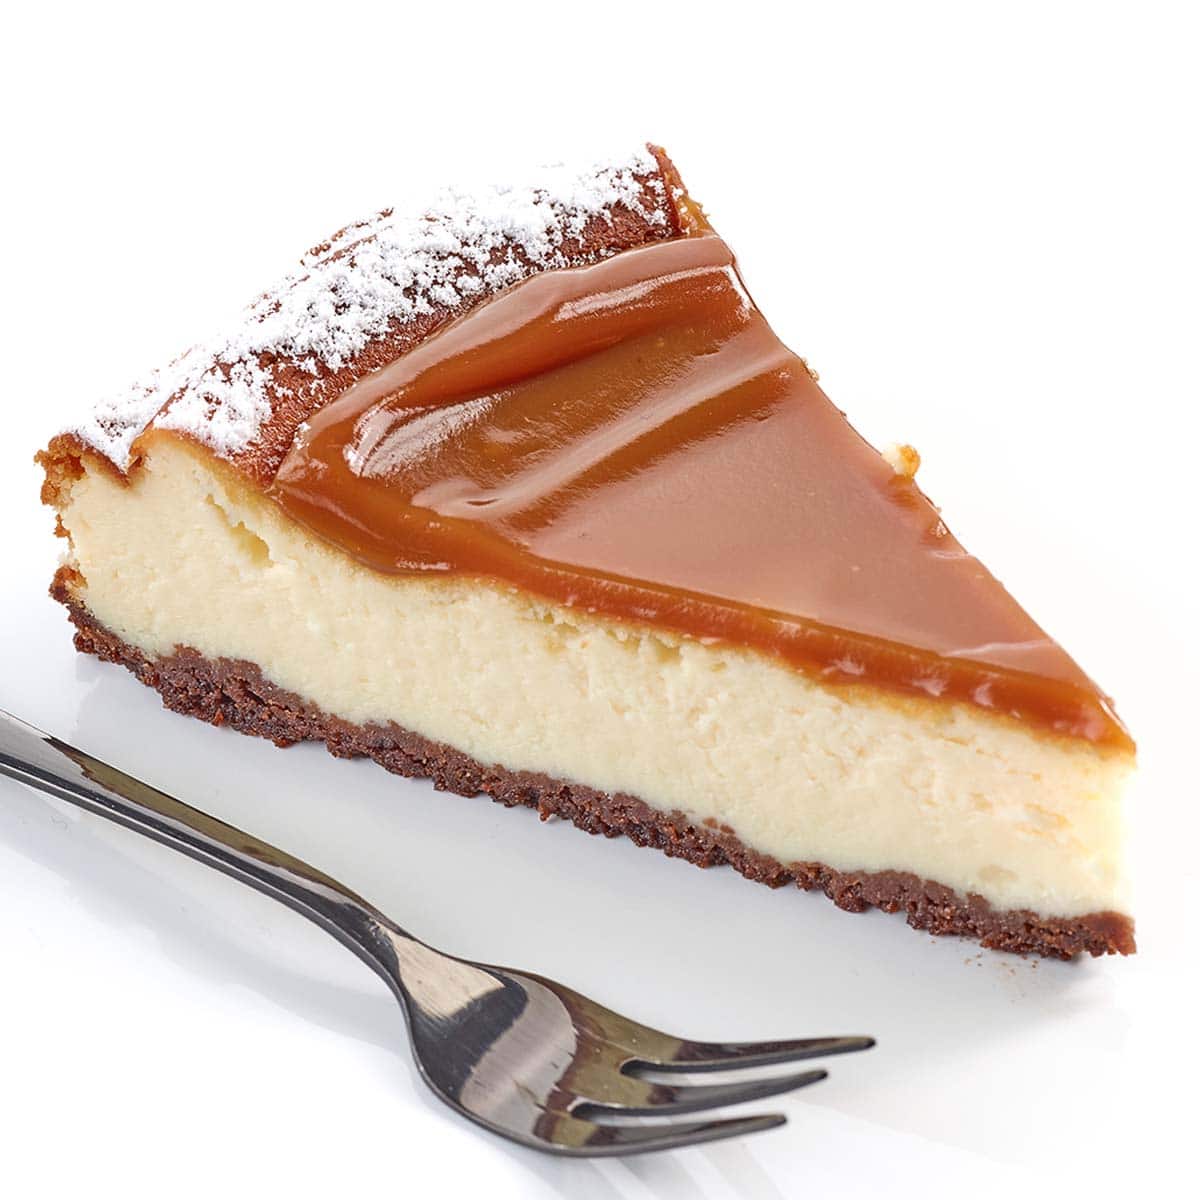 Cutting into a cheesecake can be a messy business. Because the cake is moist, it tends to cling to the knife, and it builds up with each stroke, making cutting it into neat slices quite a challenge.